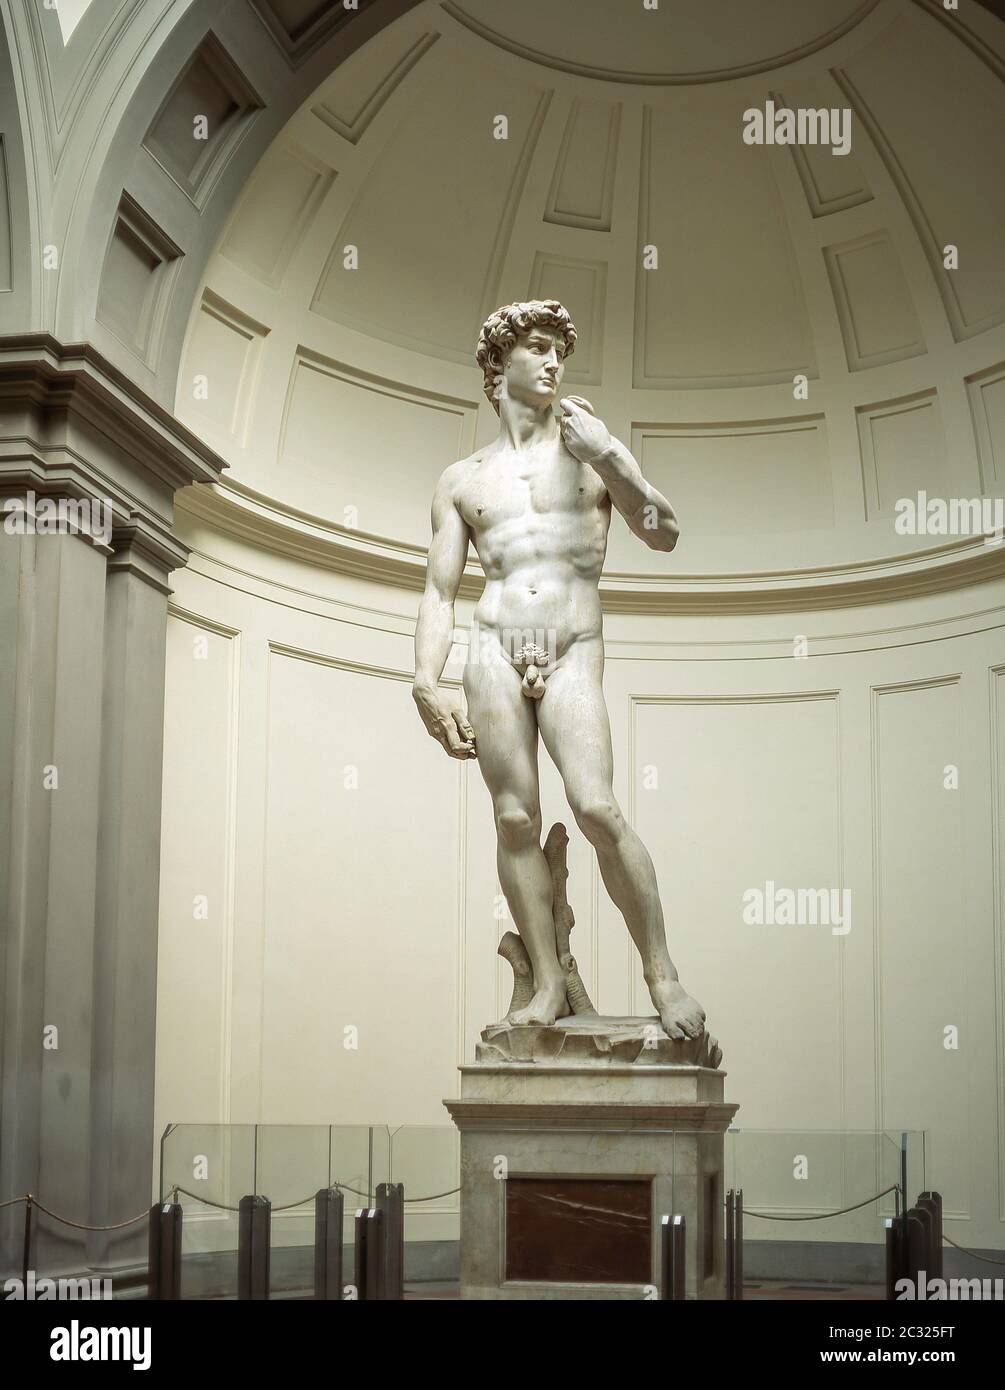 The 'Statue of David' by Michelangelo, Accademia di Belle Arti, Florence (Firenze), Tuscany Region, Italy Stock Photo